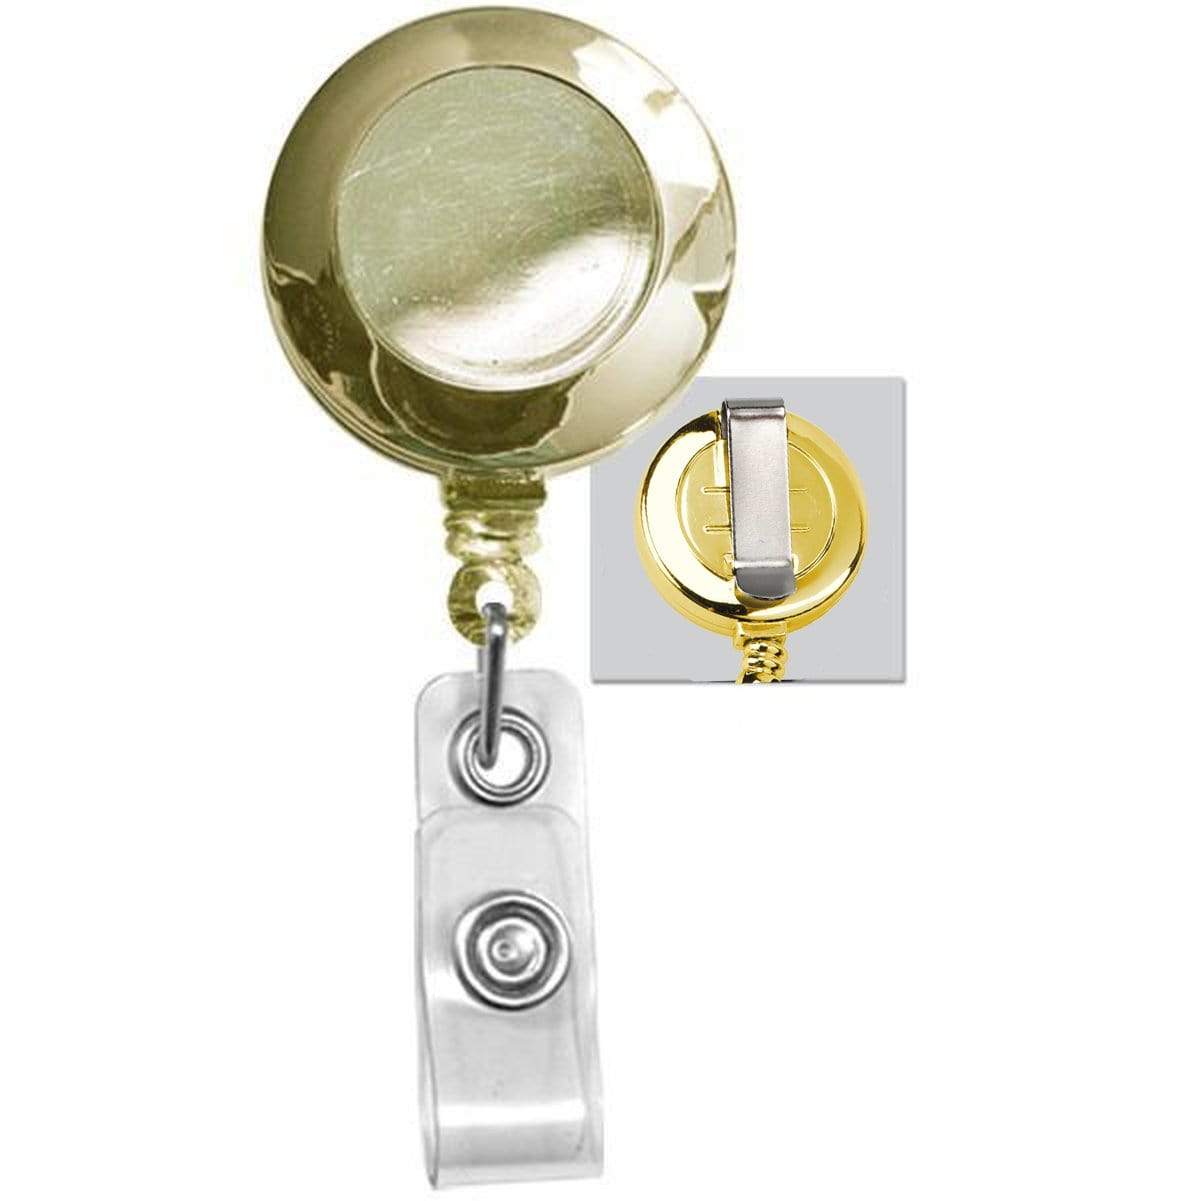 Gold Retractable Badge Reel With Belt Clip (P/N 2120-3035) 2120-3035